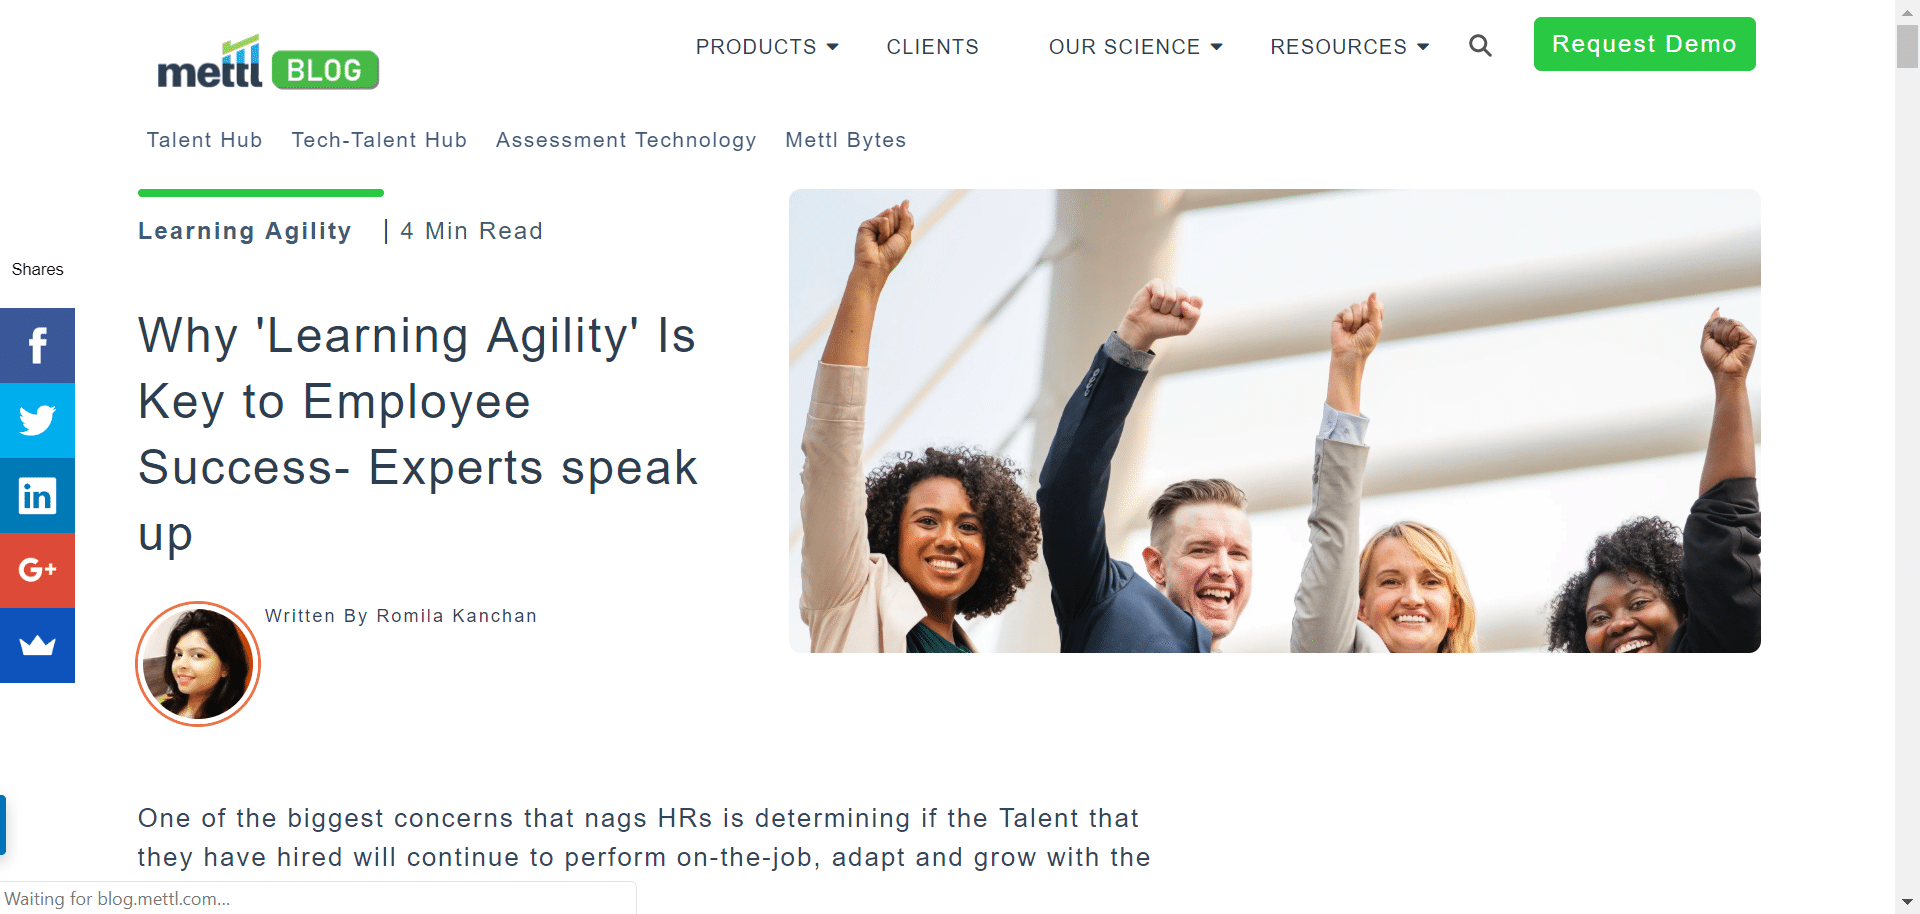 Susan comments on learning agility